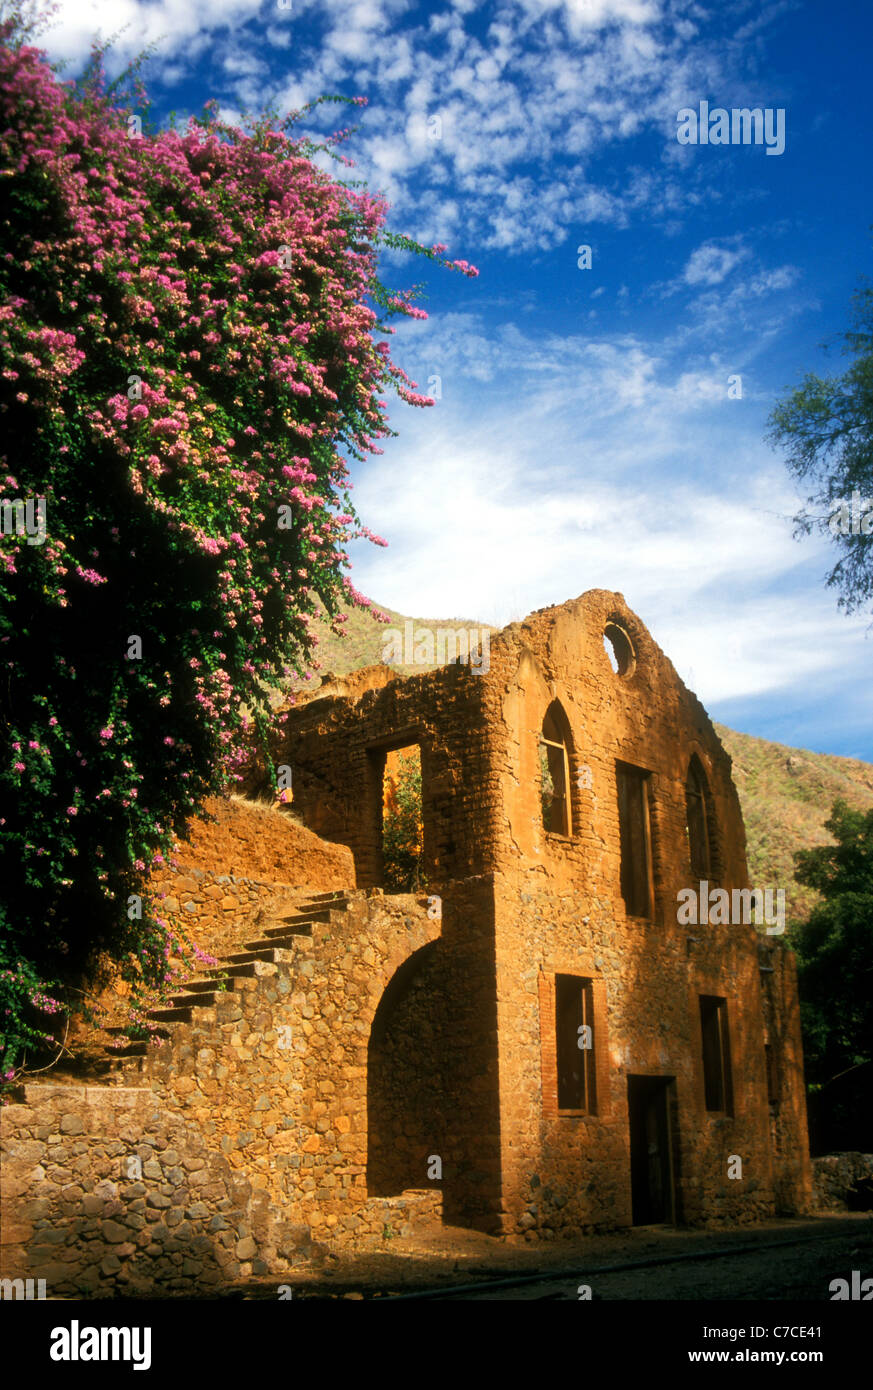 Hacienda San Miguel, the ruined former home of a mine manager in the Copper Canyon region of the Sierra Madre, northern Mexico Stock Photo